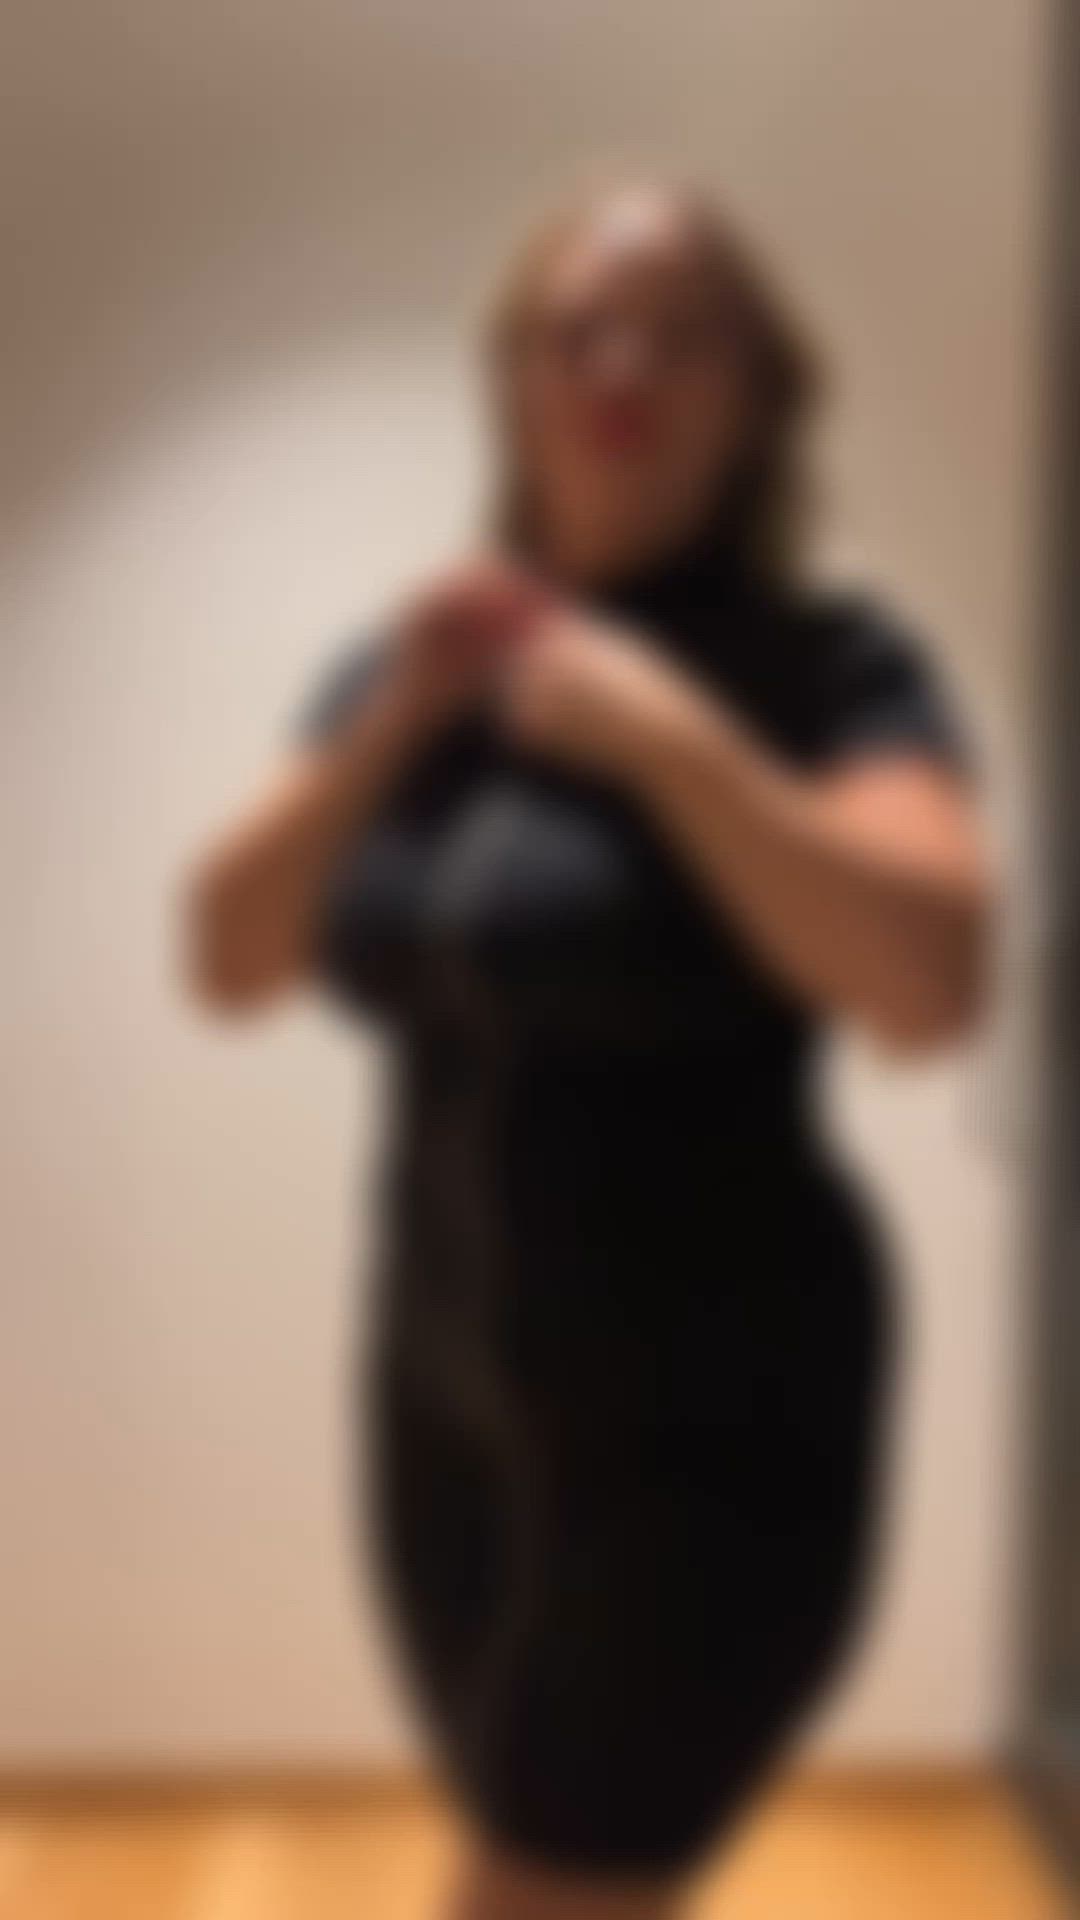 Amateur porn video with onlyfans model hotwifetherapy <strong>@wifetherapy</strong>